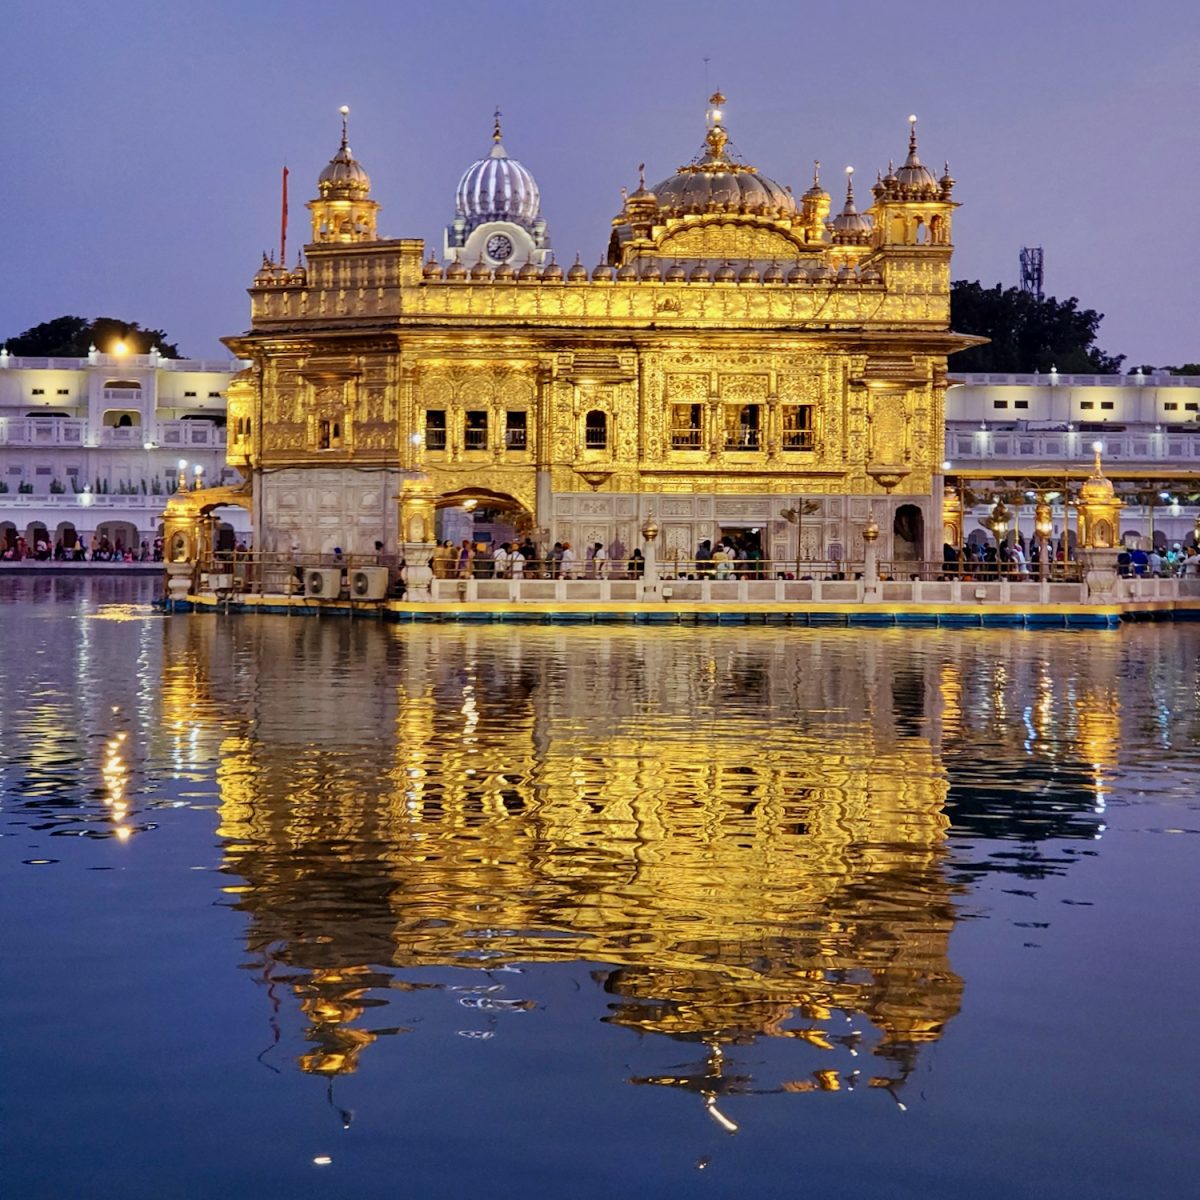 The Golden Temple in Amritsar, India at sunset